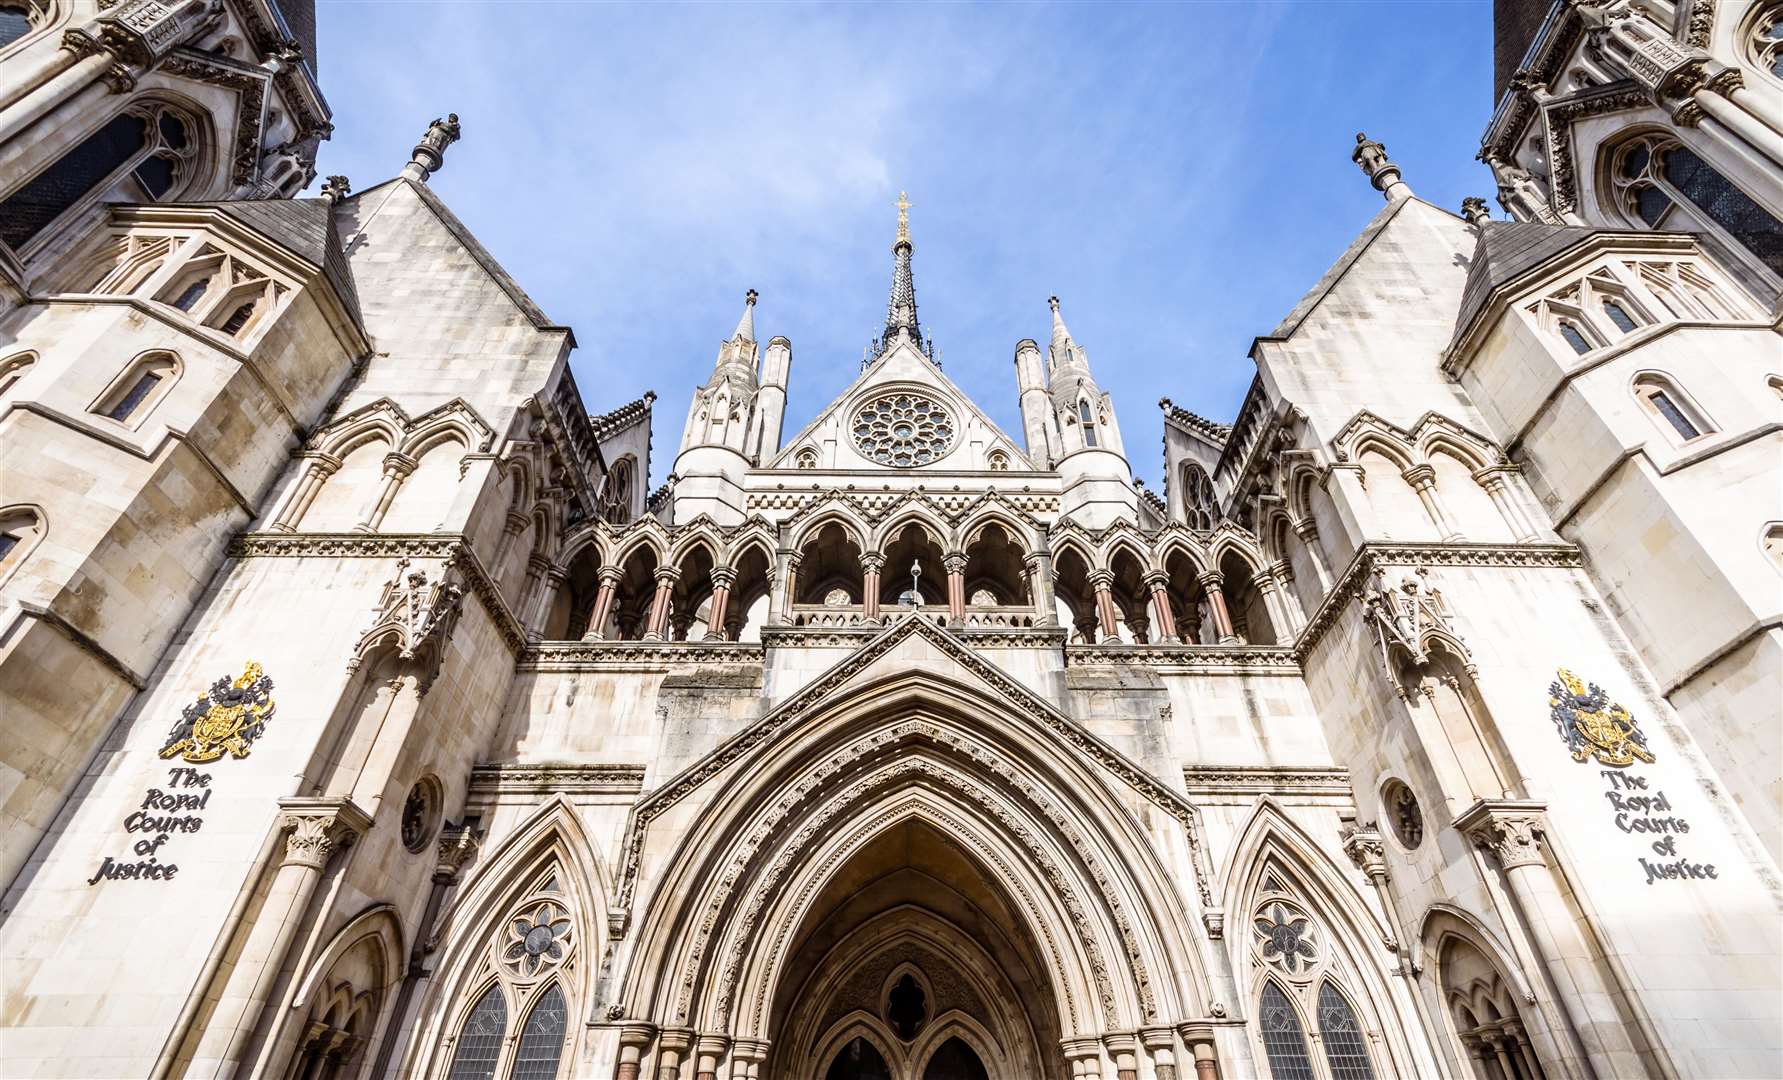 The Law Courts in London cleared many sub-postmasters